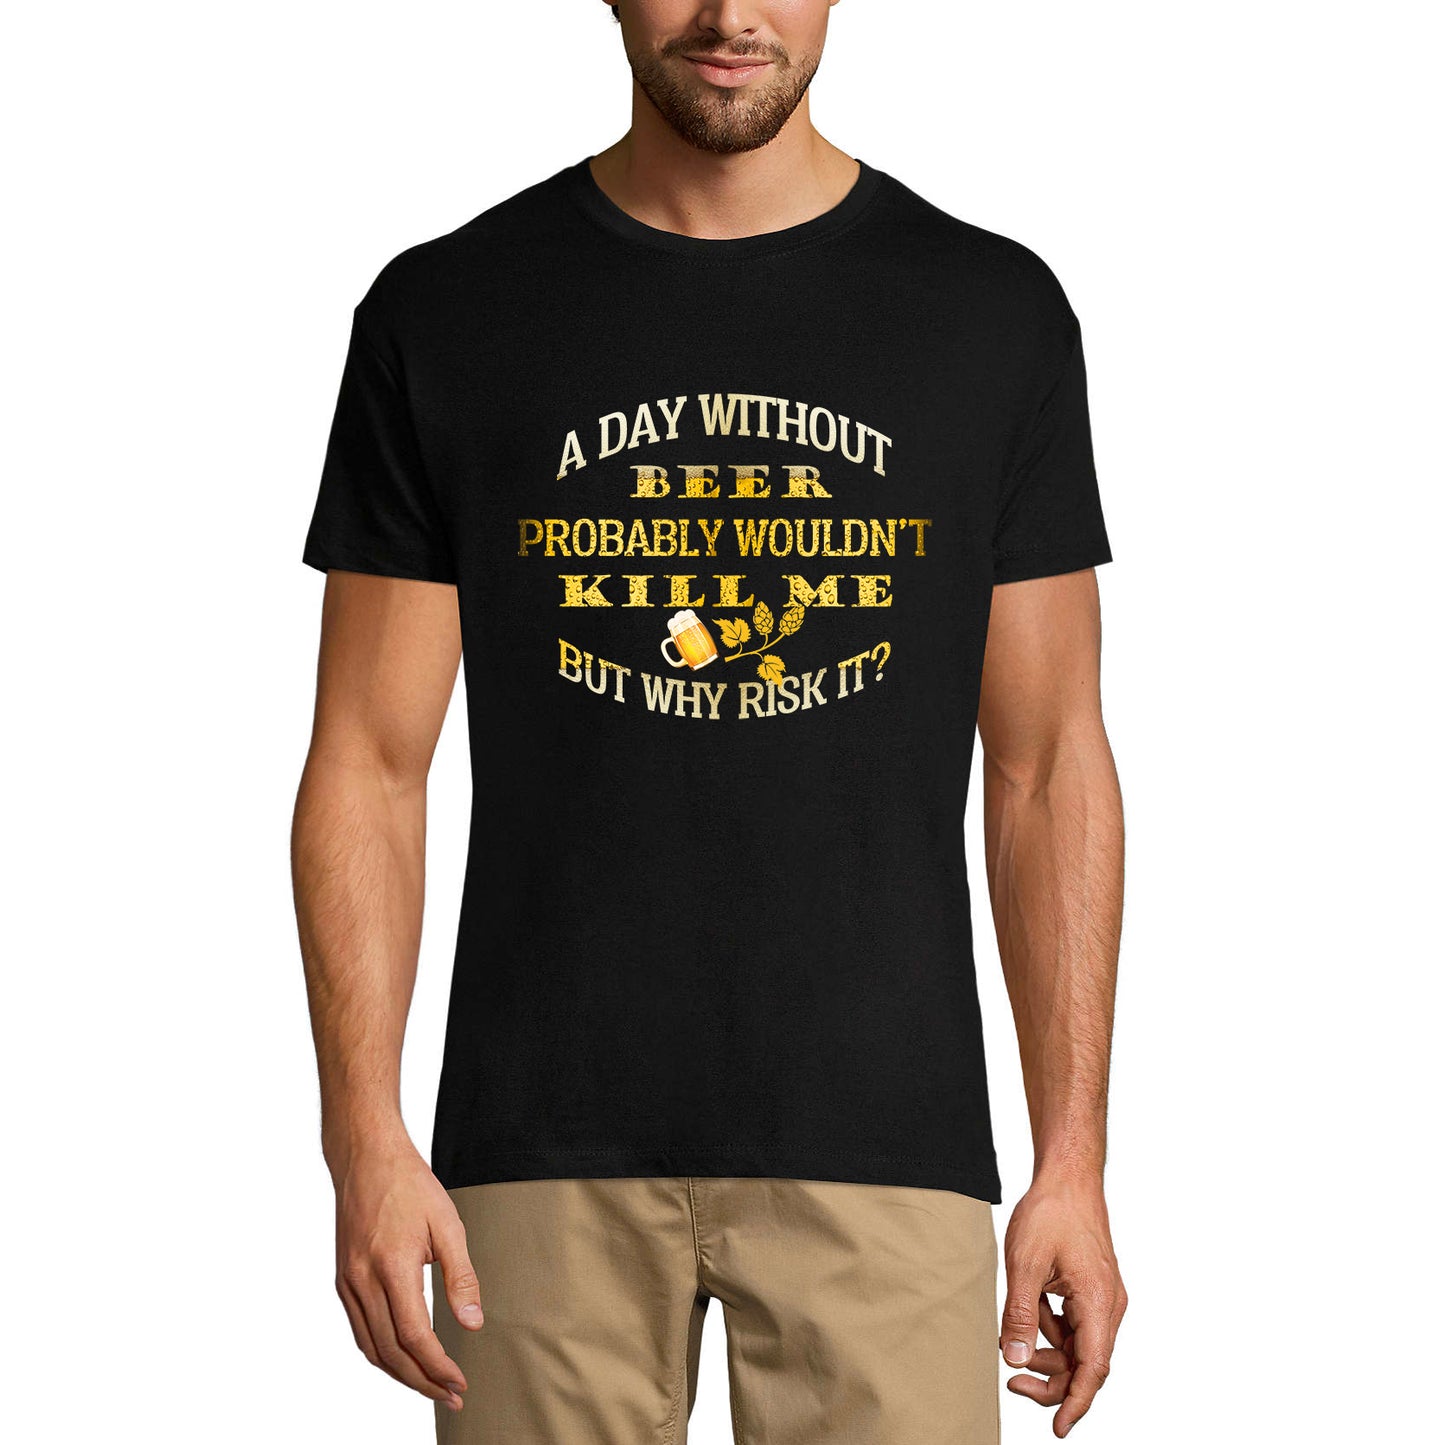 ULTRABASIC Men's Funny T-Shirt Day Without Beer Probably Wouldn't Kill Me But Why Risk It - Beer Lover Tee Shirt